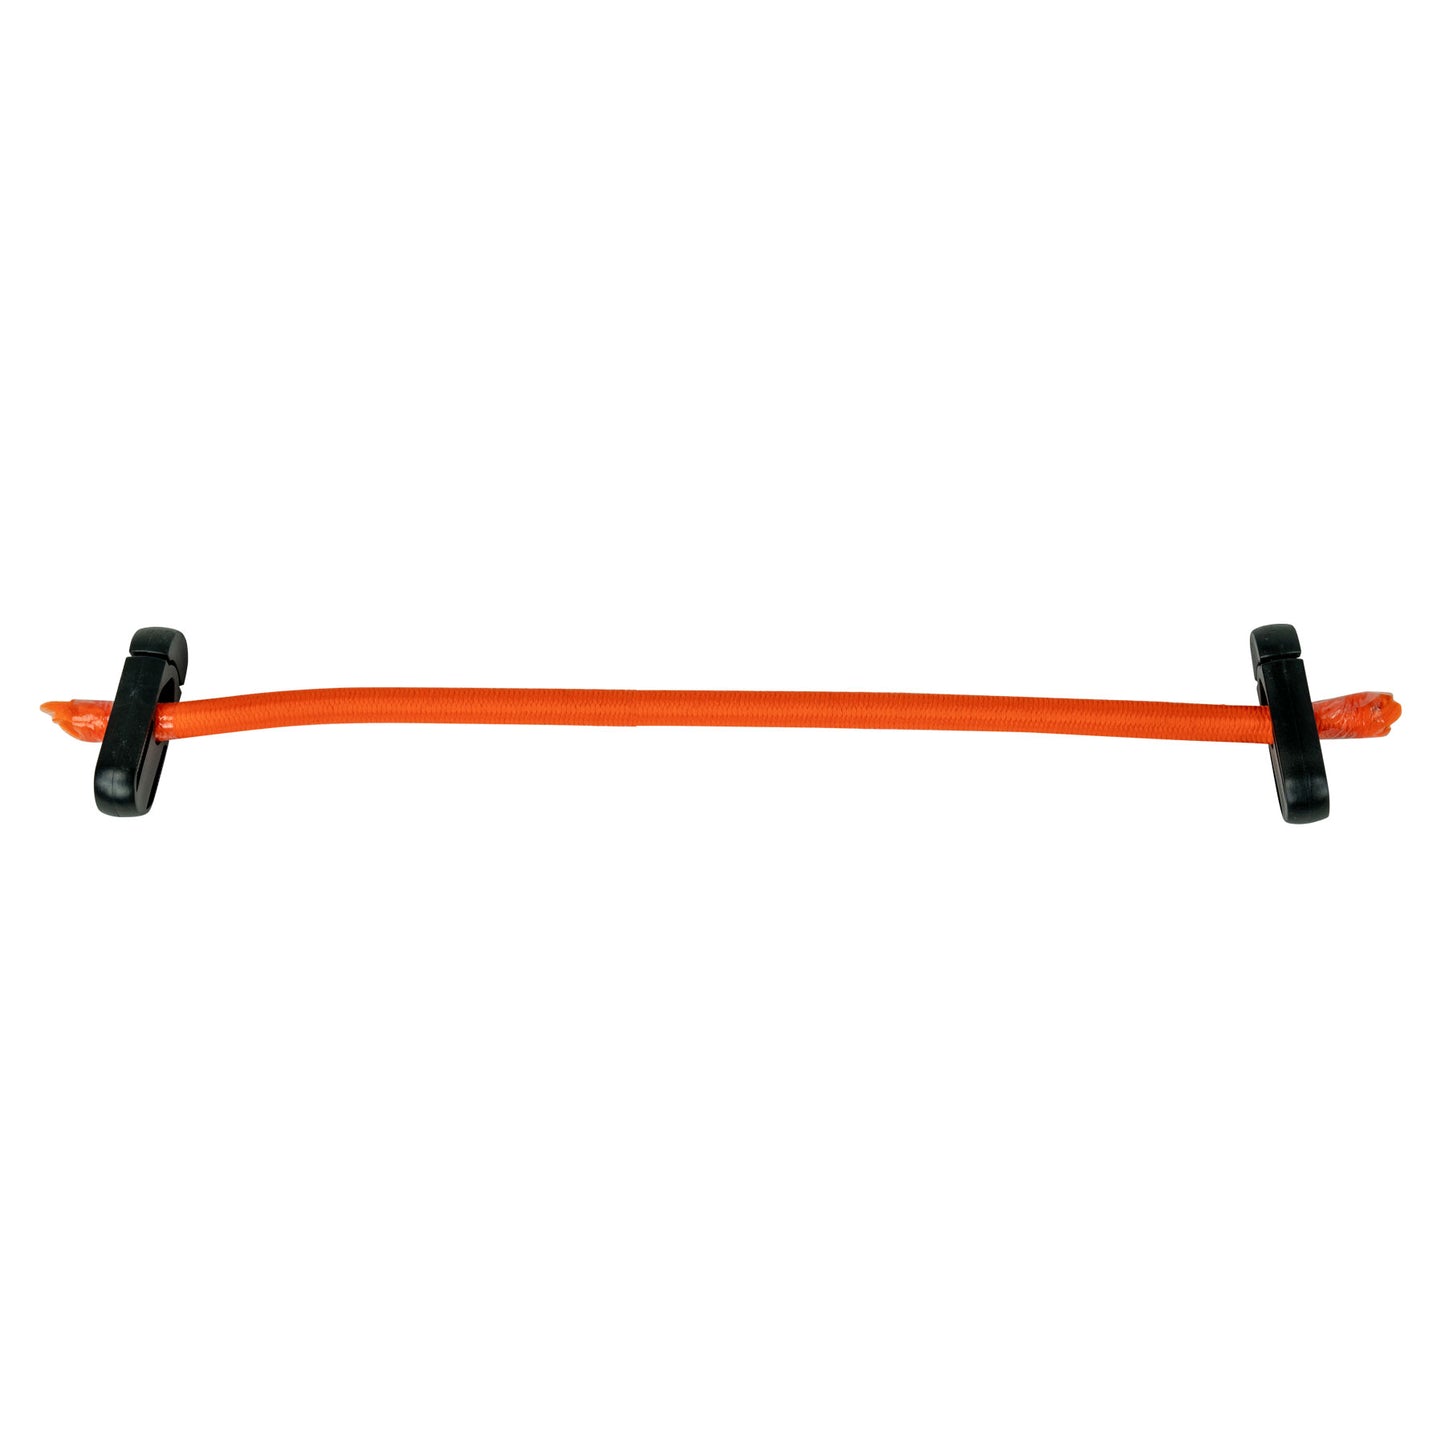 Pro Series Full Body Specklebelly Orange Bungees - 6 Bungees